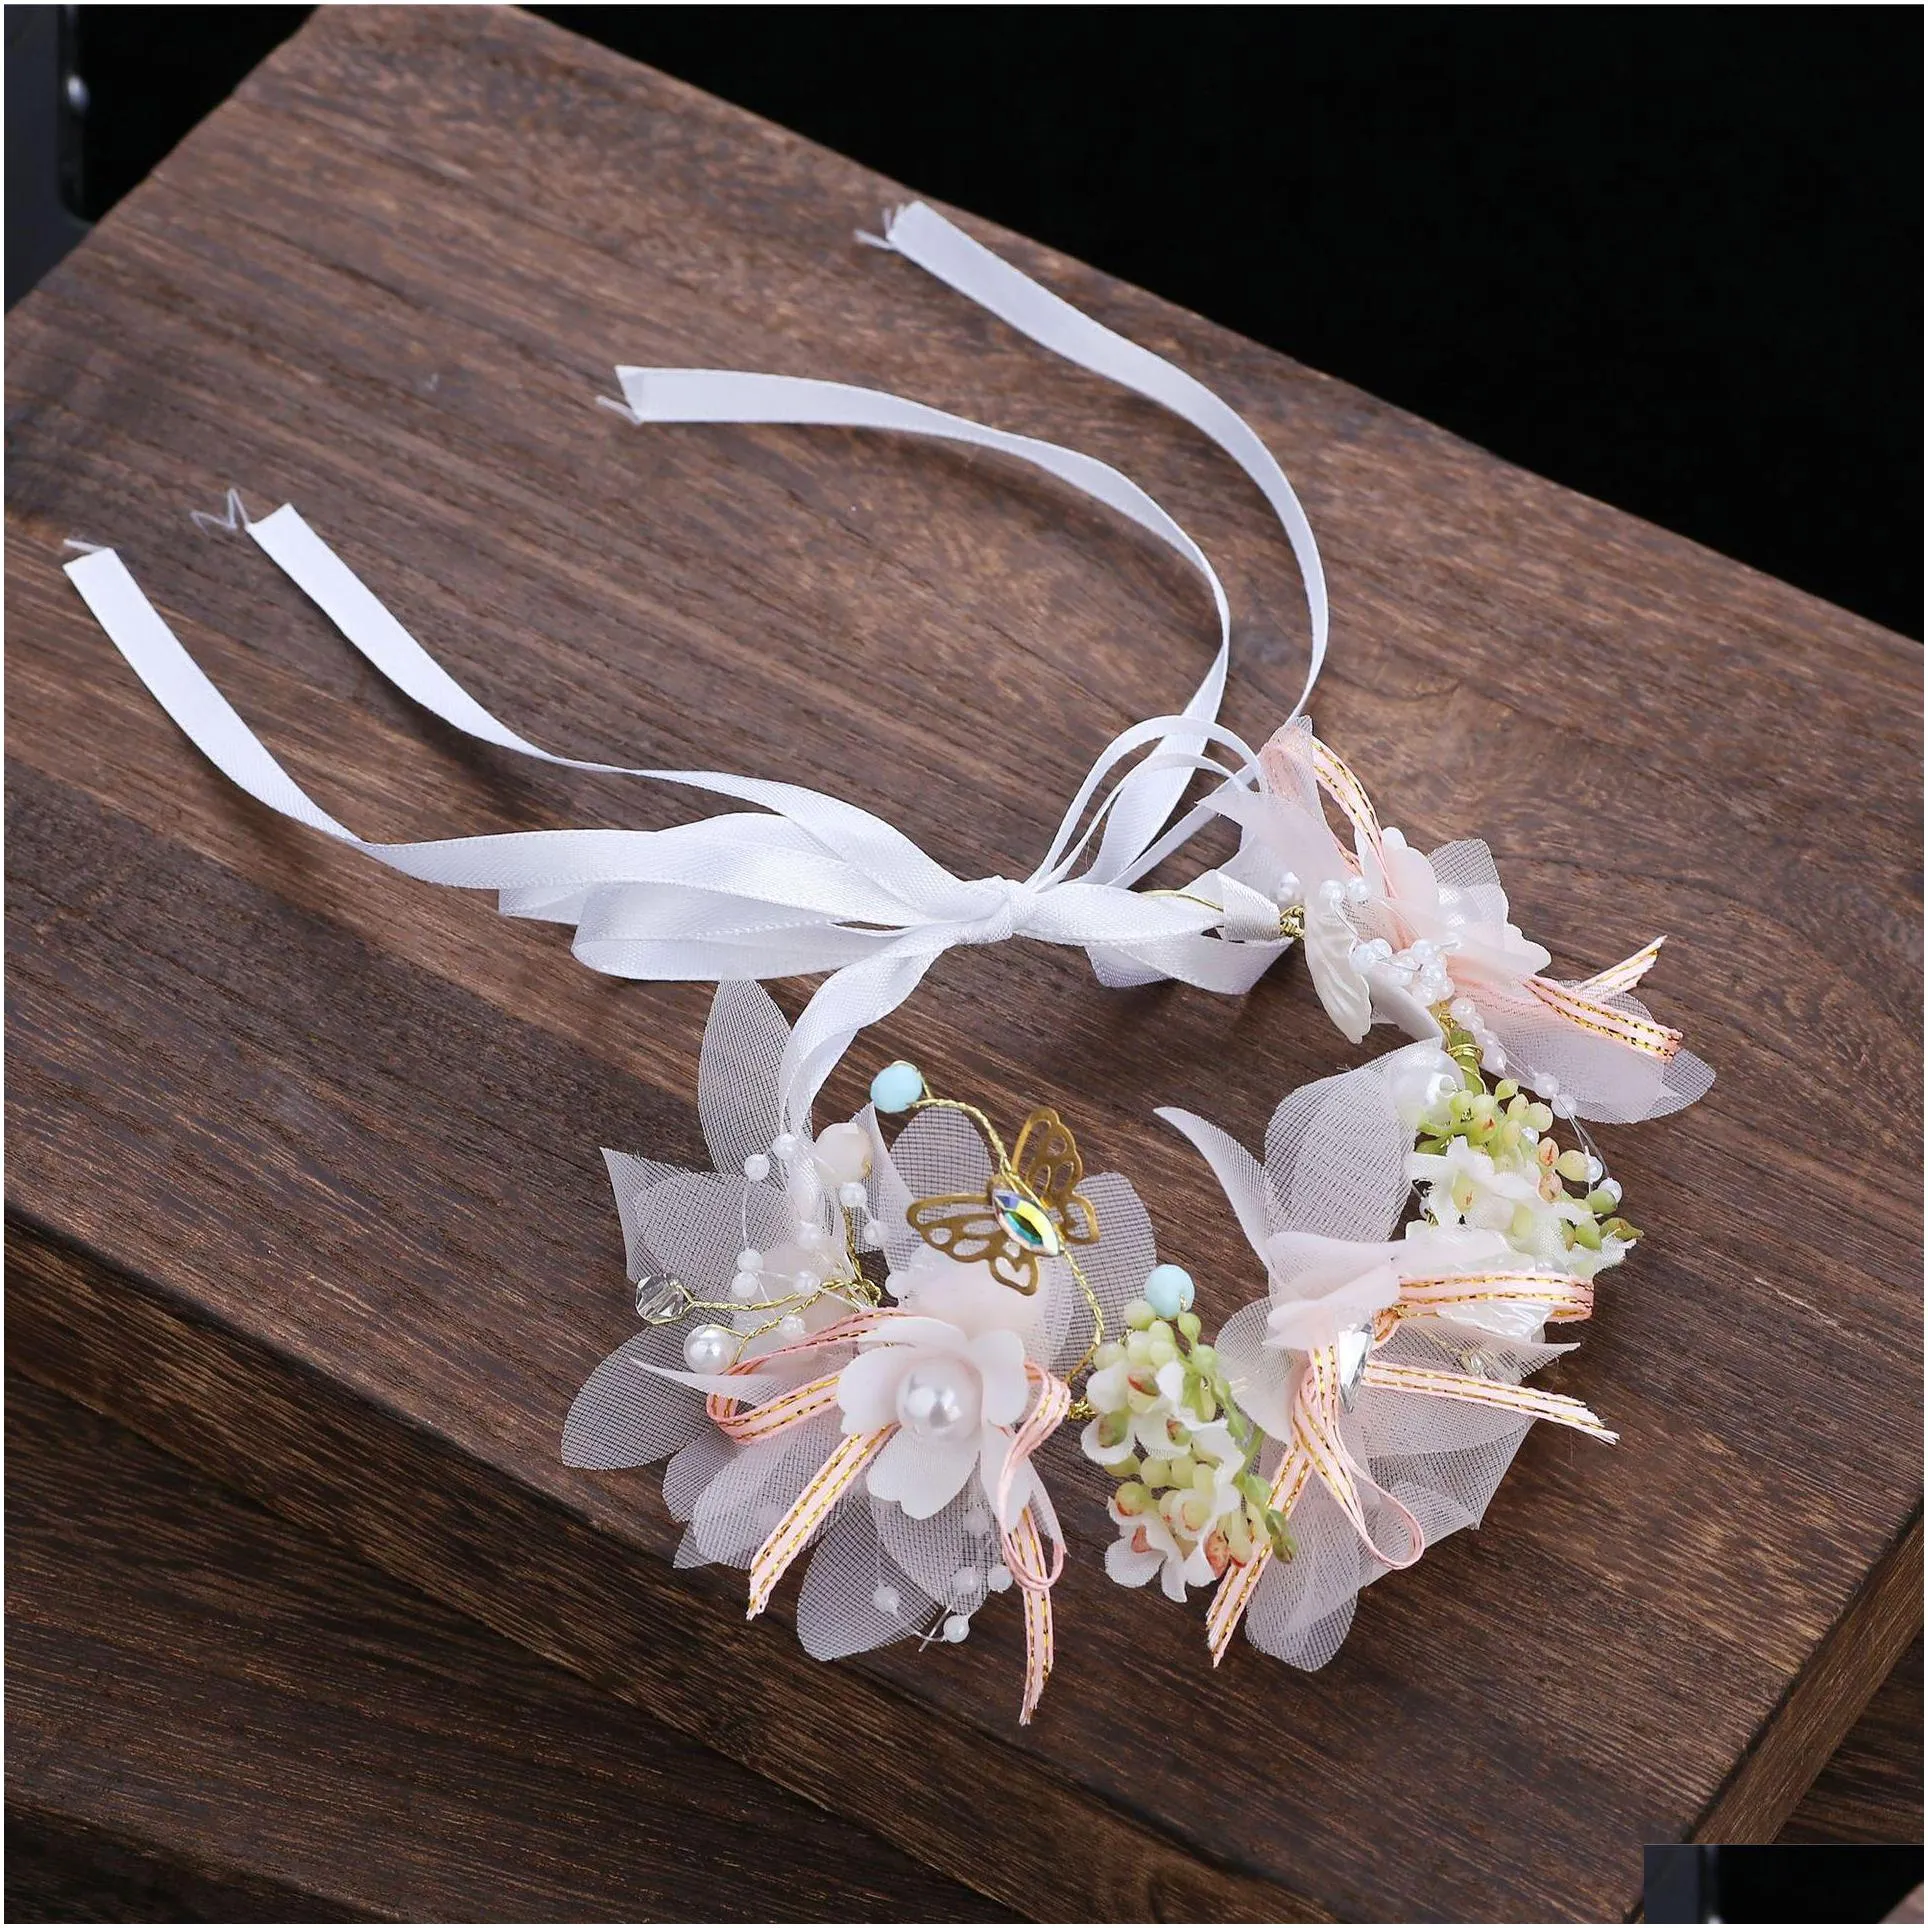 floral crowns for girls fairy tale flowers bridal tiara headpieces pearls beaded ribbon headband wedding party hair accessories women headdress